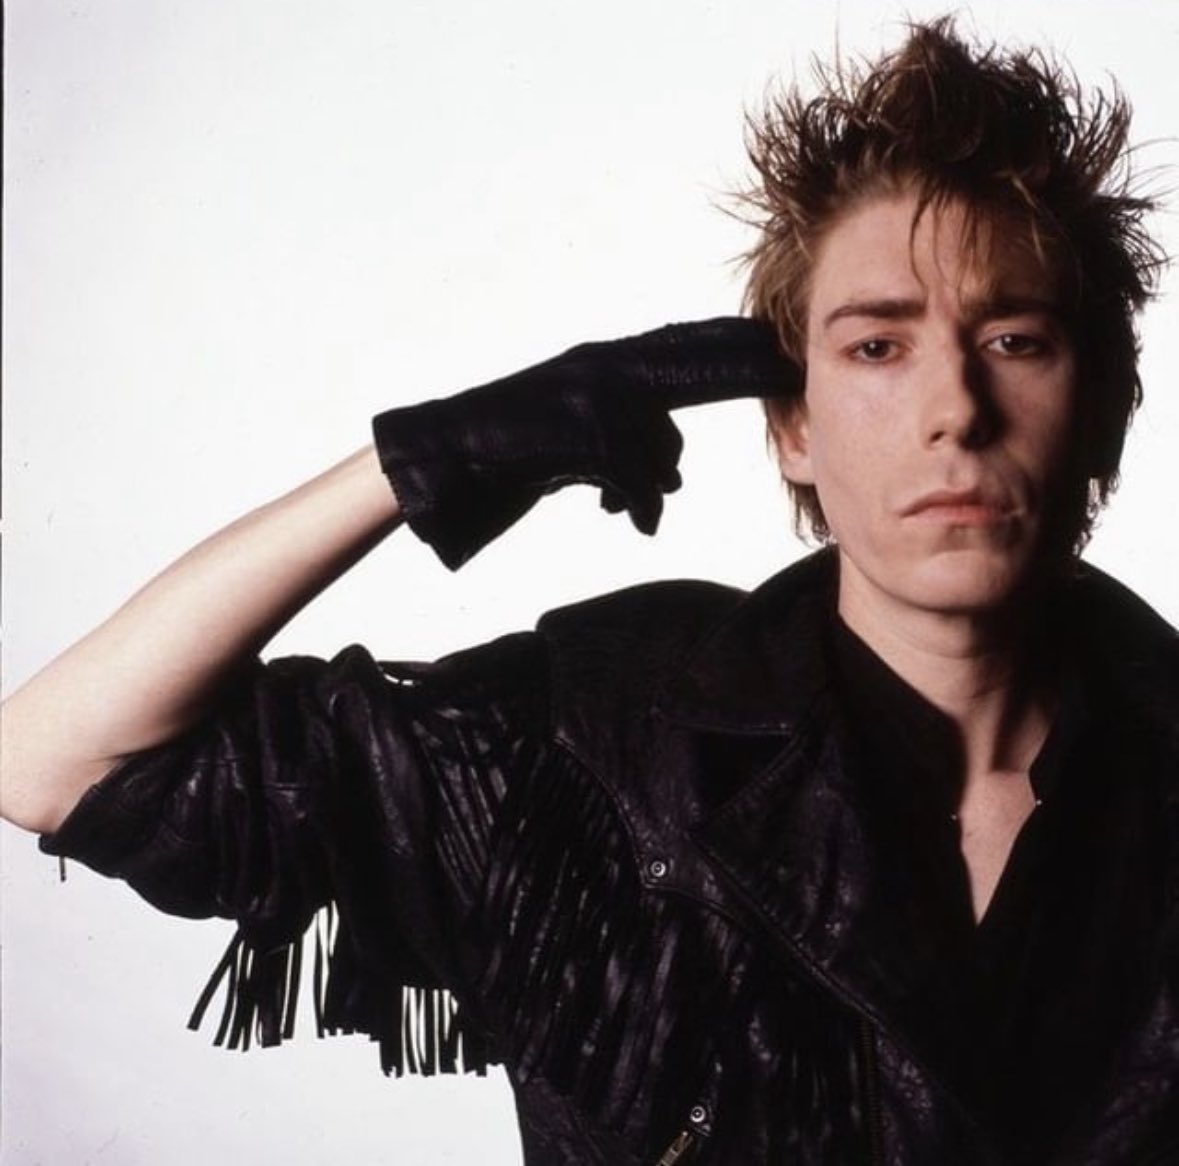 Birthday Cheers to Richard Butler of @pfurs and Love Spit Love! #richardbutler #thepsychedelicfurs #lovespitlove #postpunk #newwave